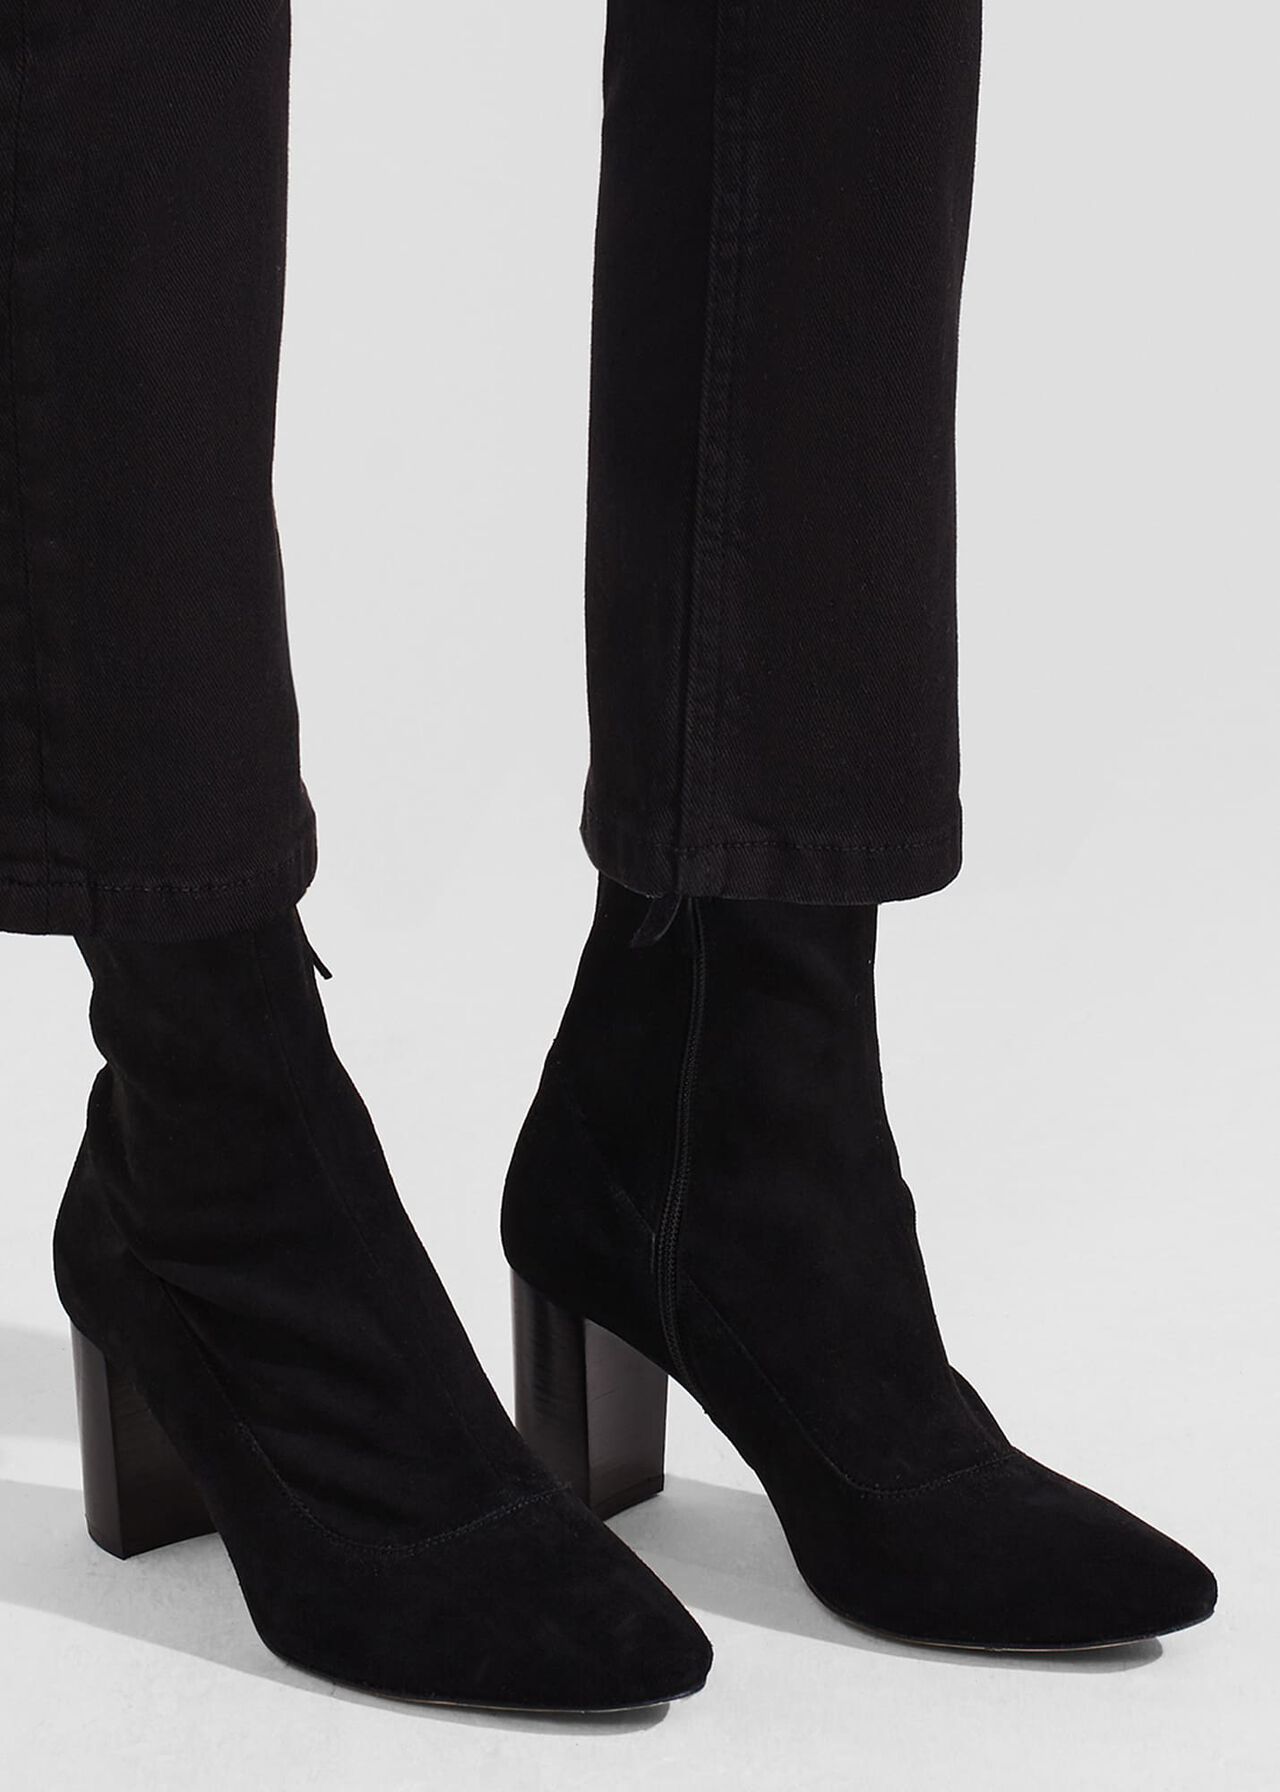 Zoey Ankle Boots, Black, hi-res